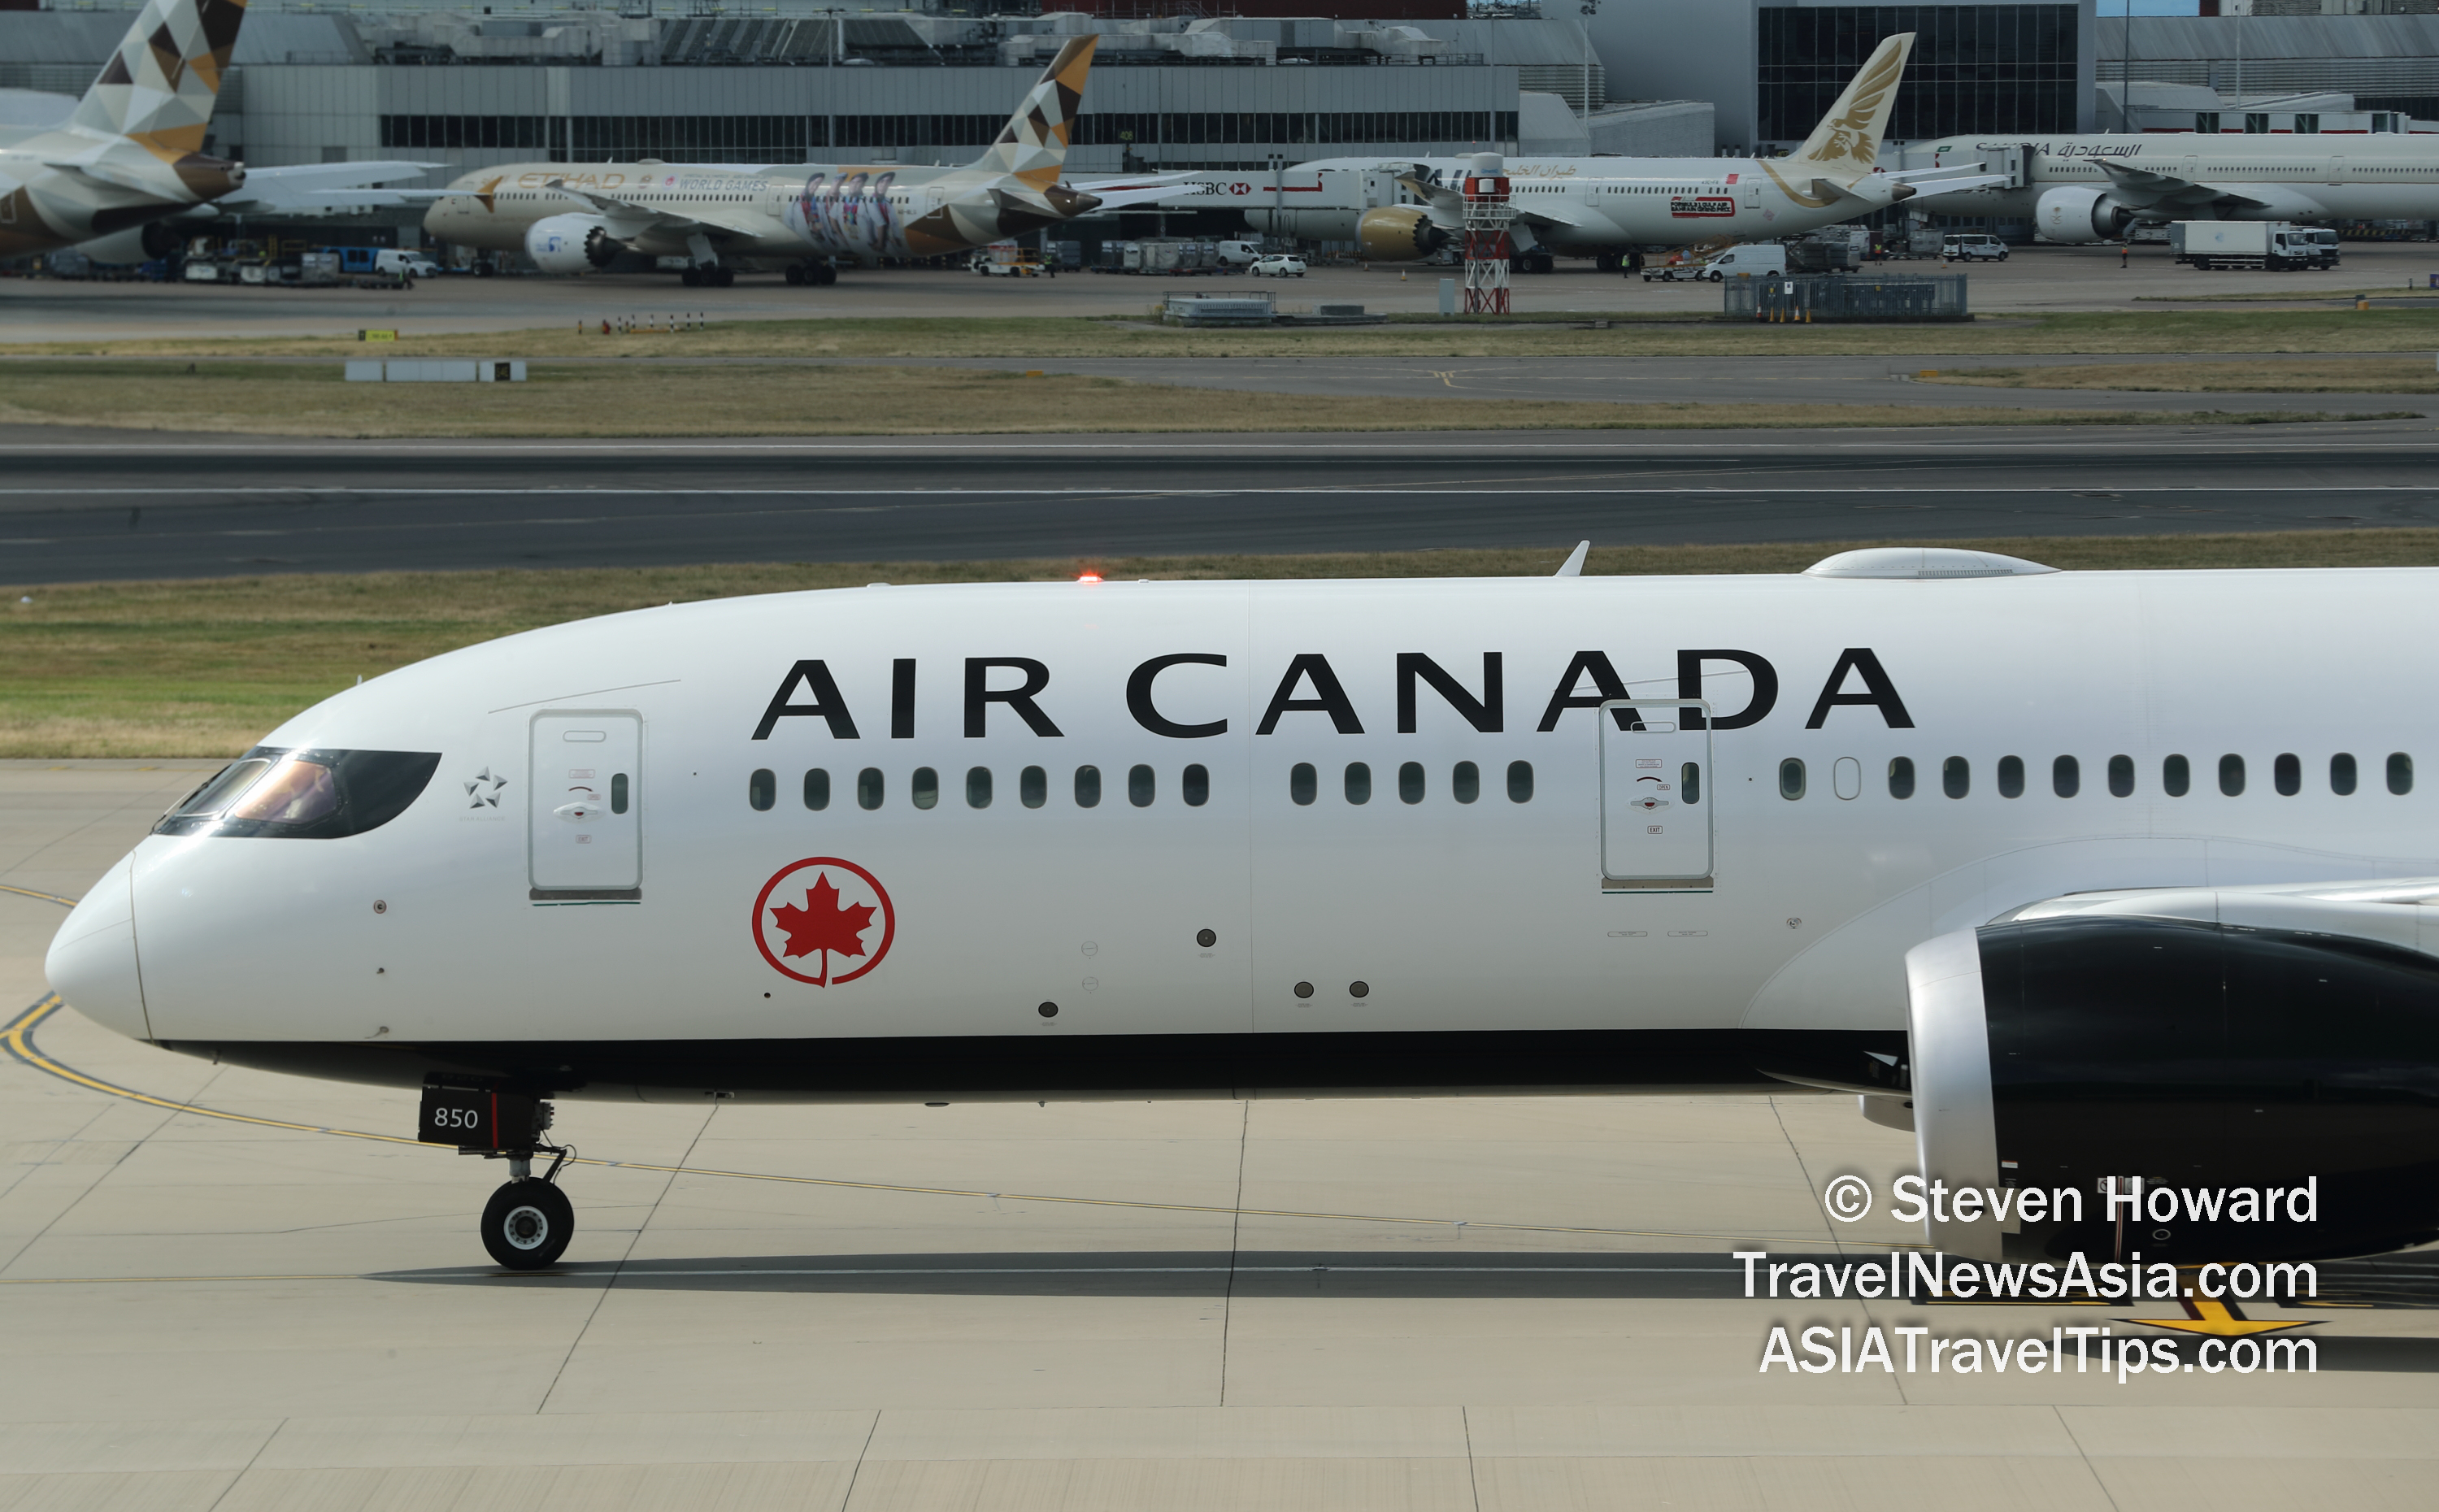 Air Canada Boeing 787-8 reg: CFRTU. Picture by Steven Howard of TravelNewsAsia.com Click to enlarge.